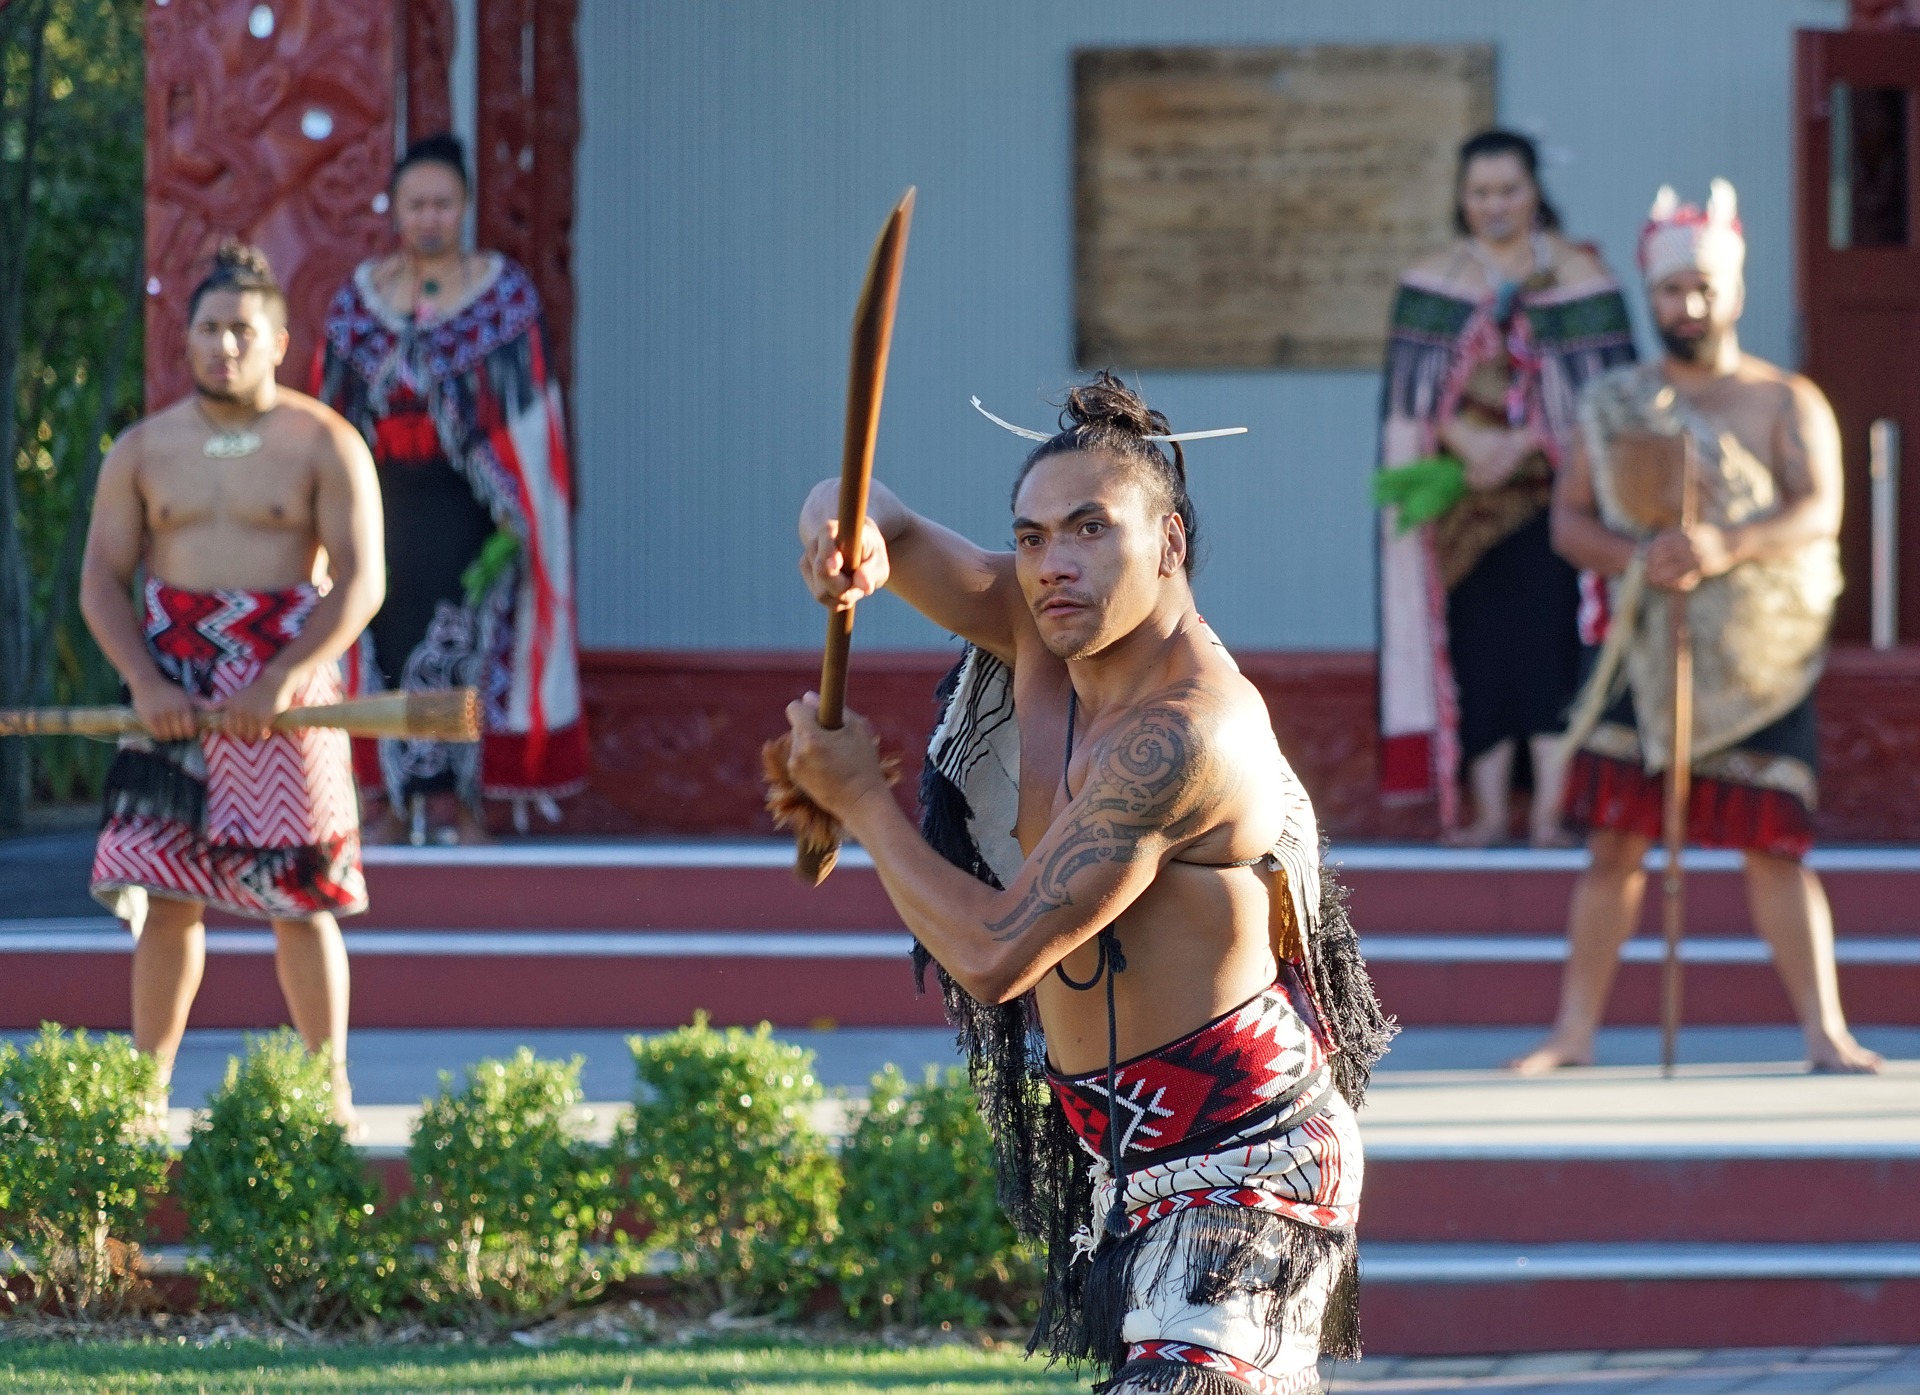 A Maori man performs during a traditional ceremony in New Zealand.